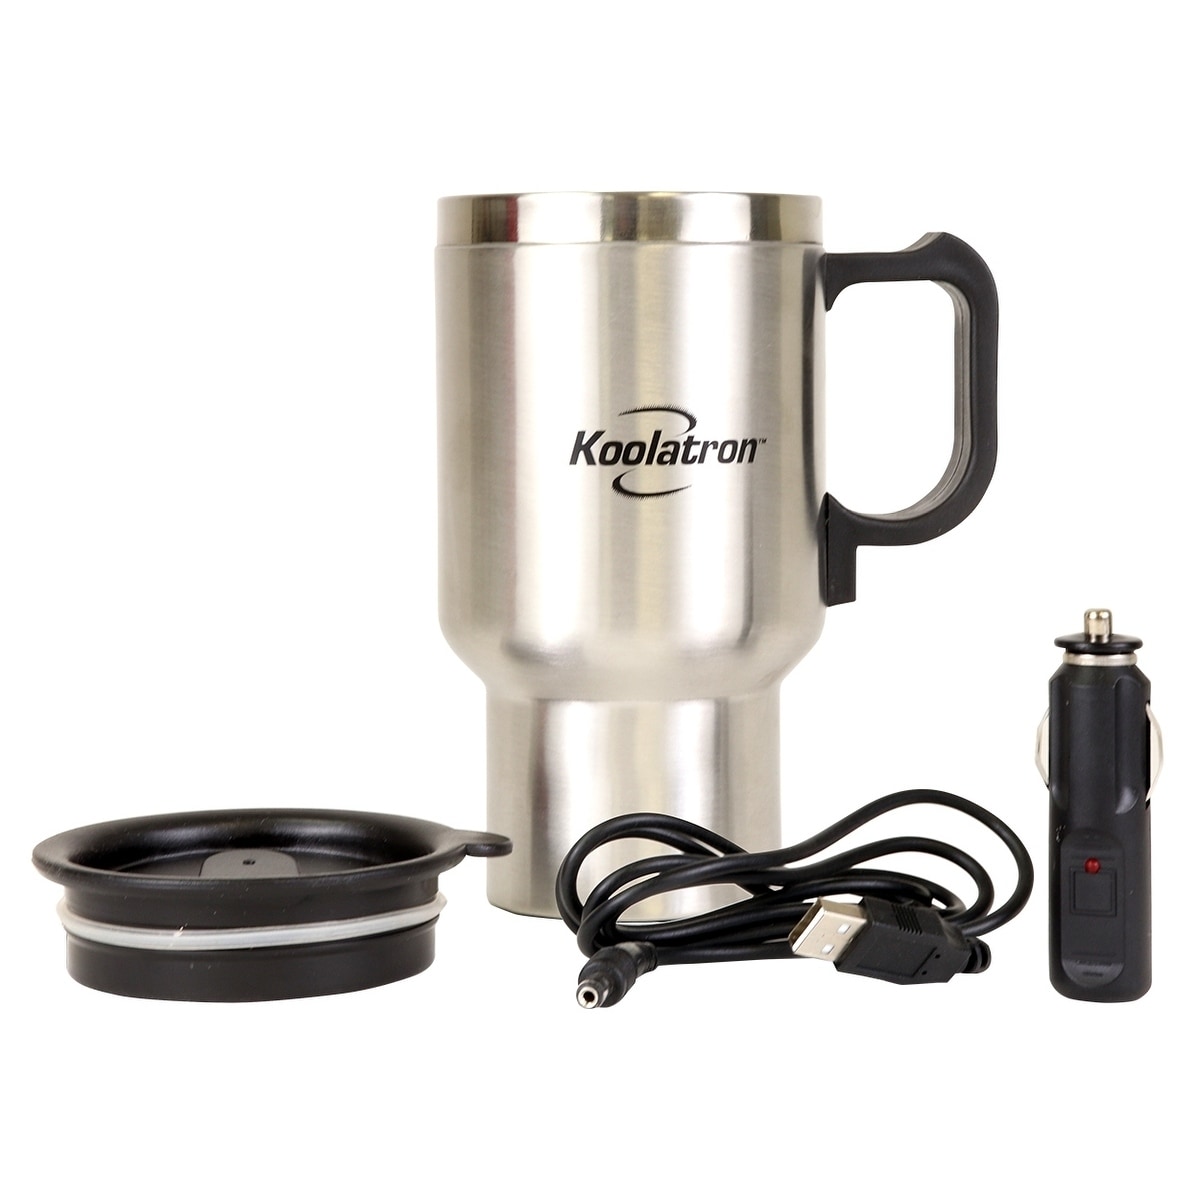 https://ak1.ostkcdn.com/images/products/is/images/direct/84fb8d3af7fce03cca79200f64a0fce68a9ba205/12V-USB-Insulated-Travel-Mug-with-Heater%2C-500-mL-%2817-oz%29.jpg